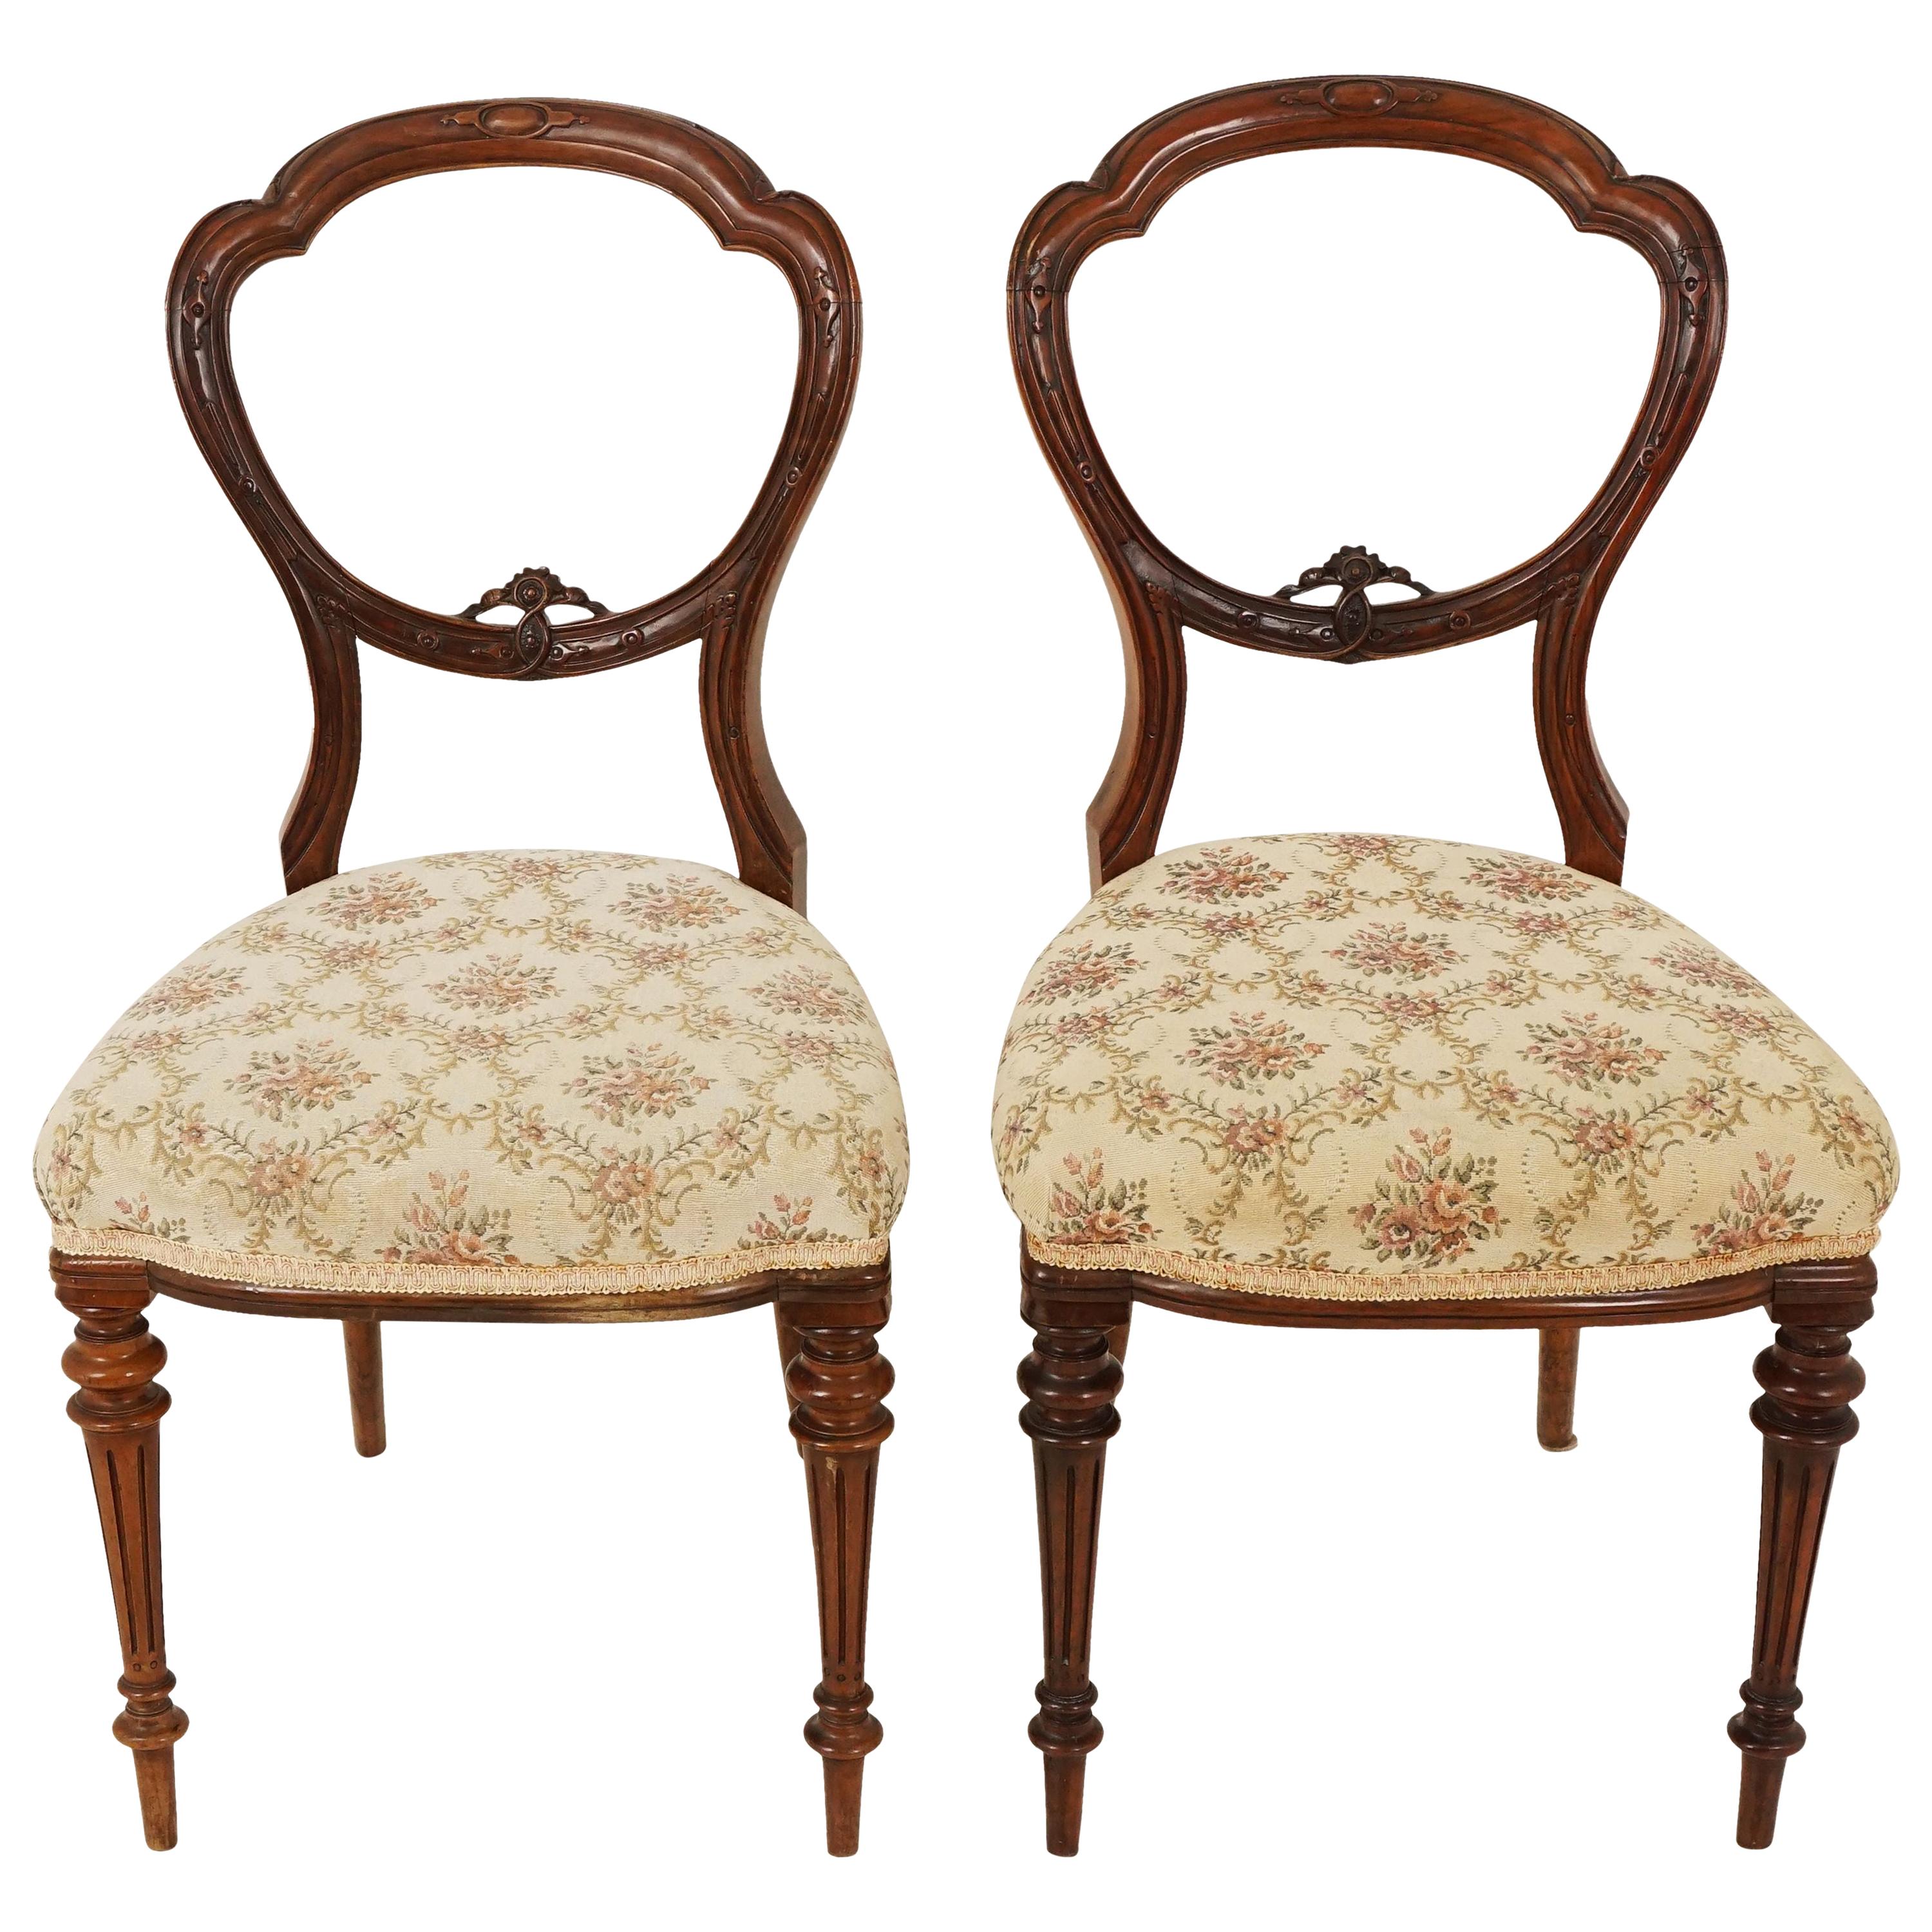 Pair of Victorian Rosewood Balloon Back Parlor Chairs, Scotland 1870, B2555